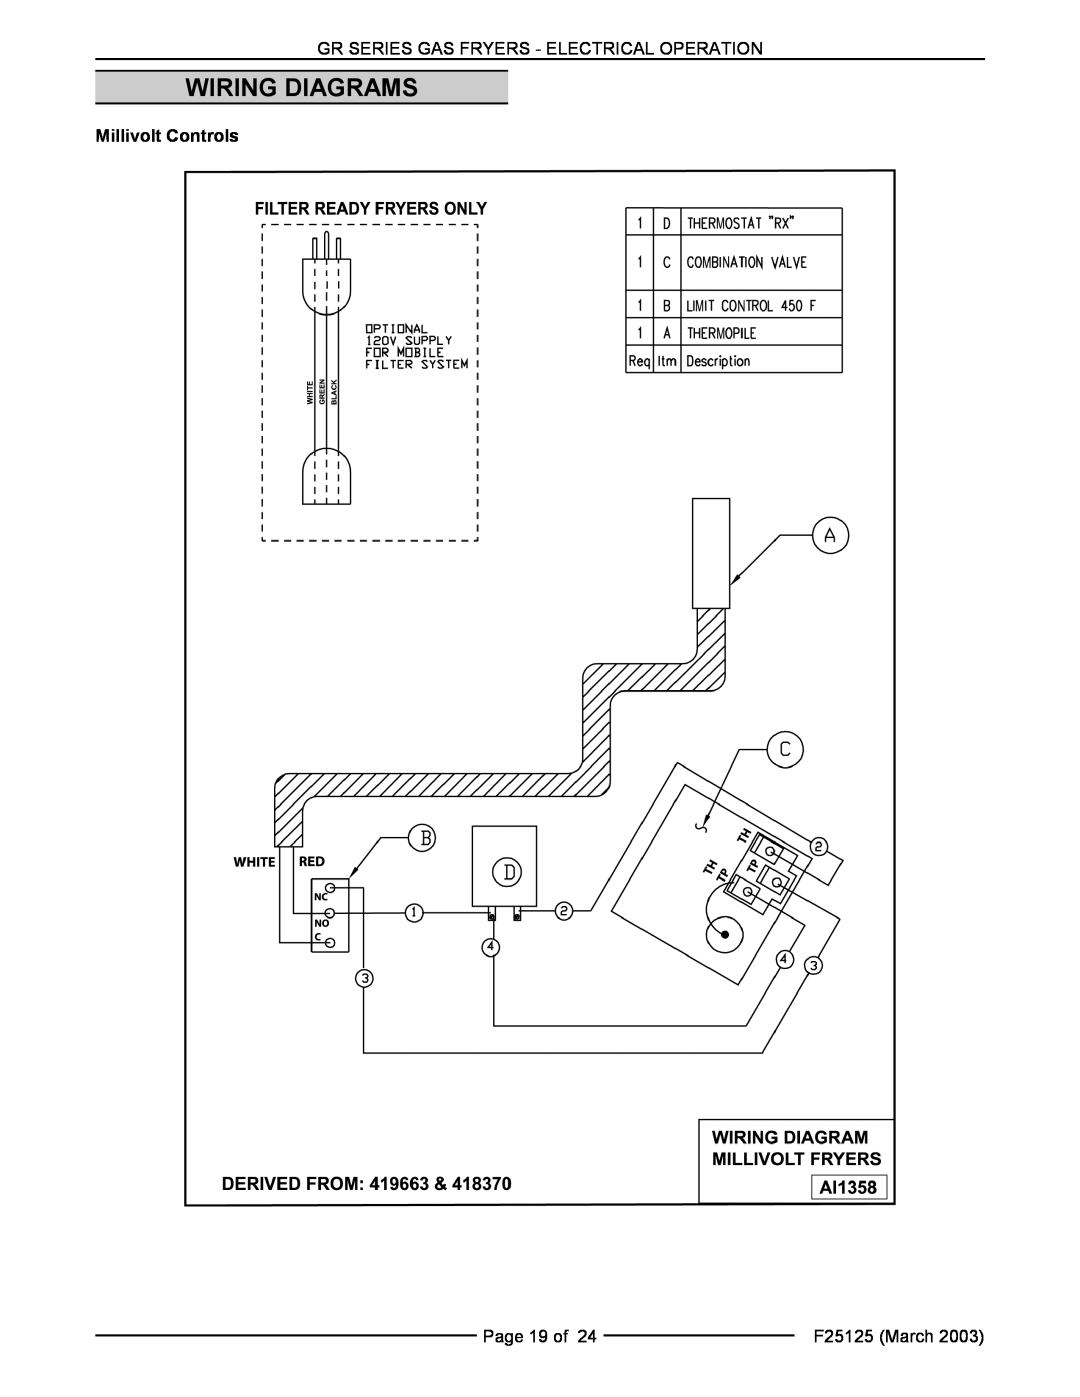 Vulcan-Hart GR45, GR85F, GR65F Wiring Diagrams, Gr Series Gas Fryers - Electrical Operation, Page 19 of, F25125 March 